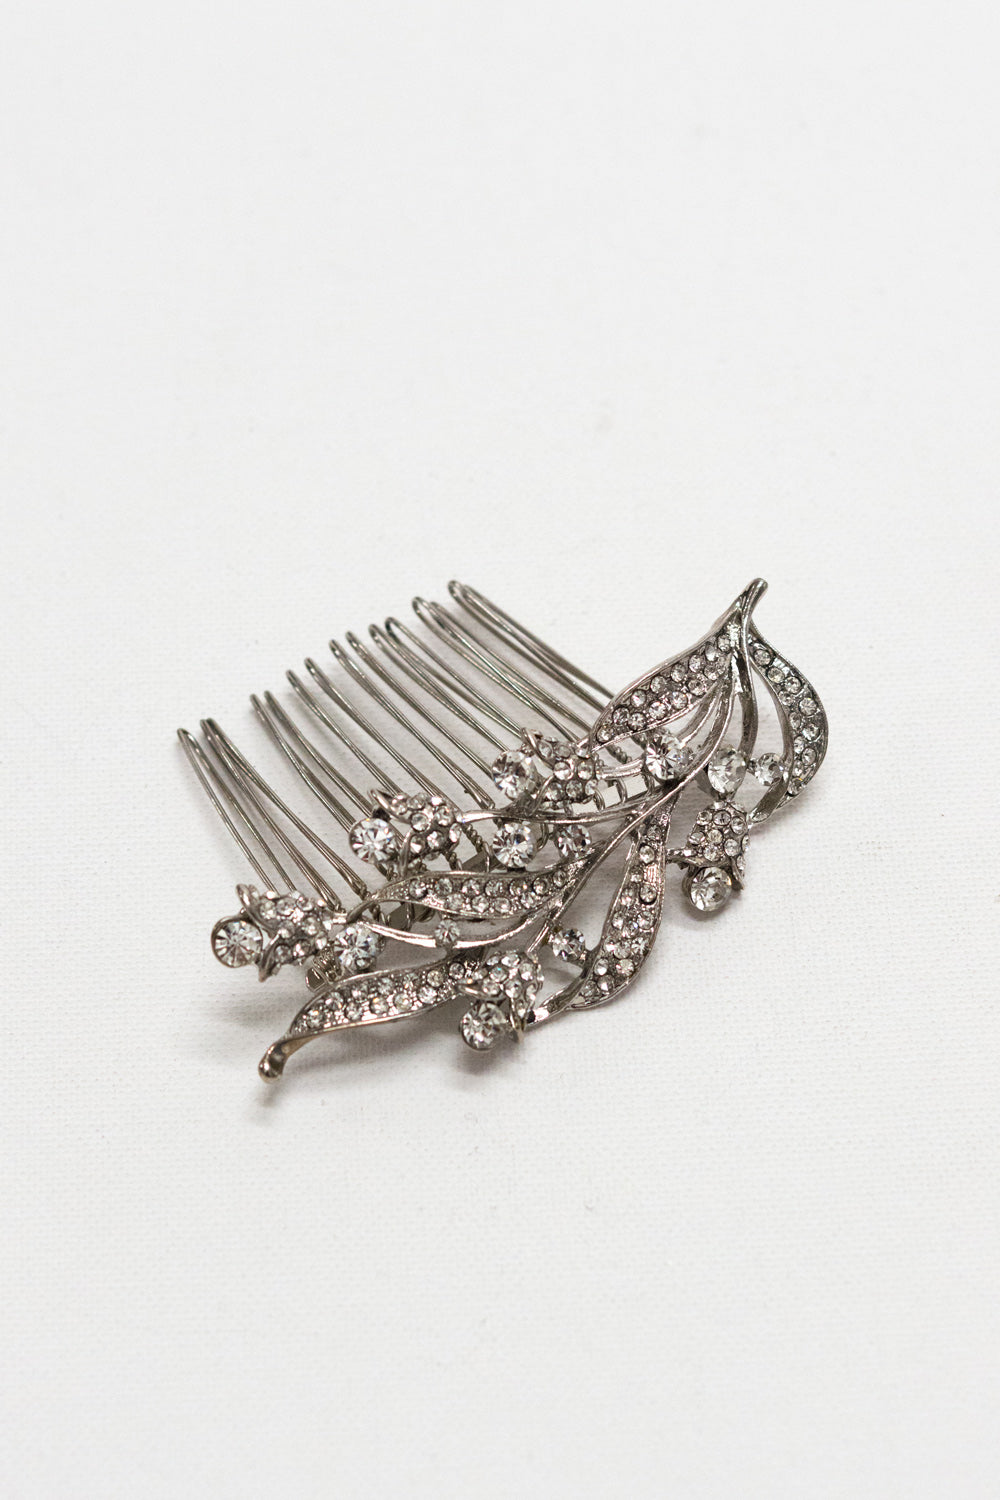 Blooming Branch Crystal Hair Comb